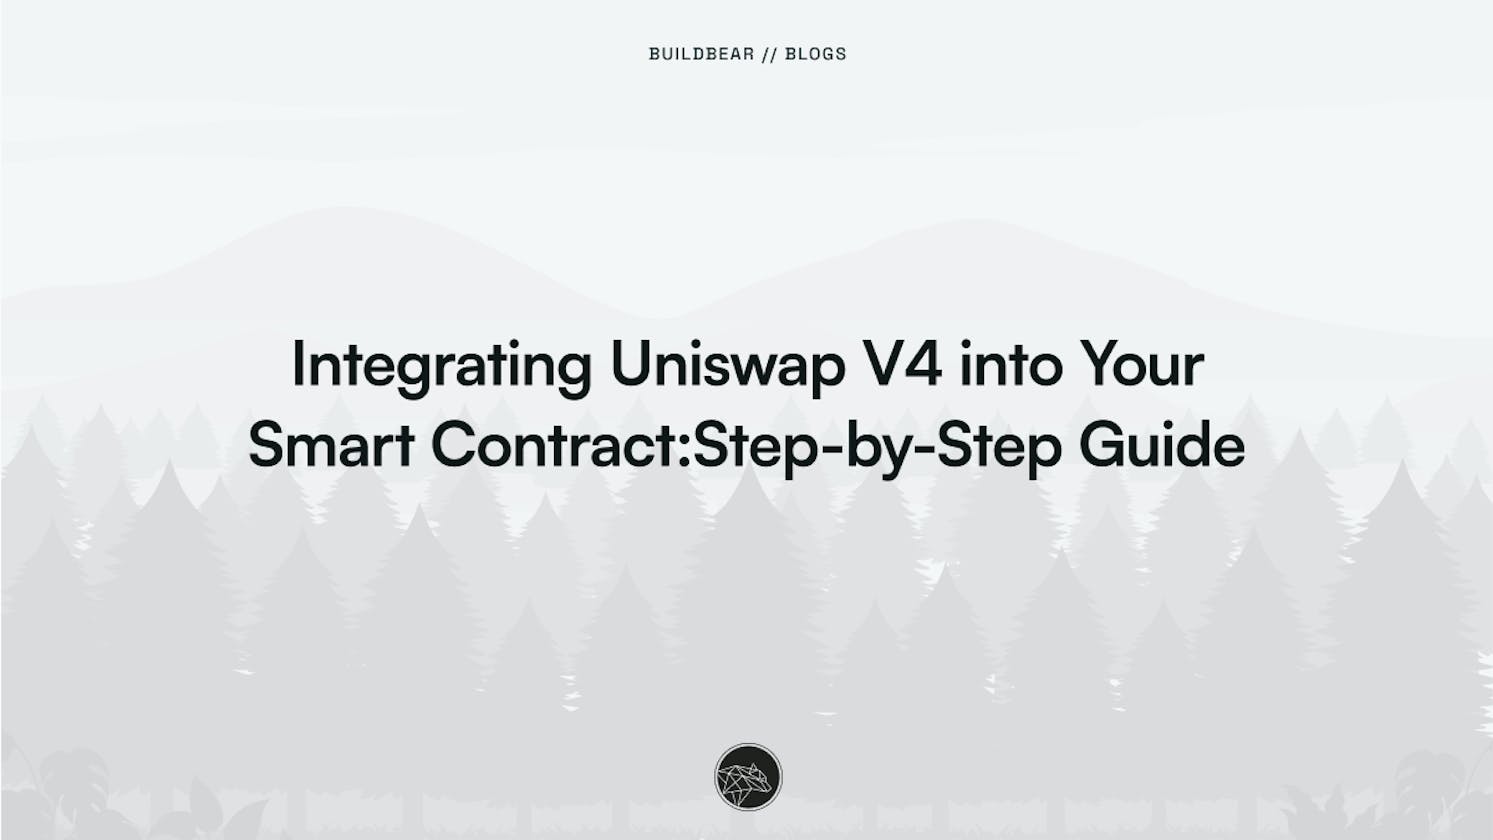 Integrating Uniswap V4 into Your Smart Contracts: A Step-by-Step Guide